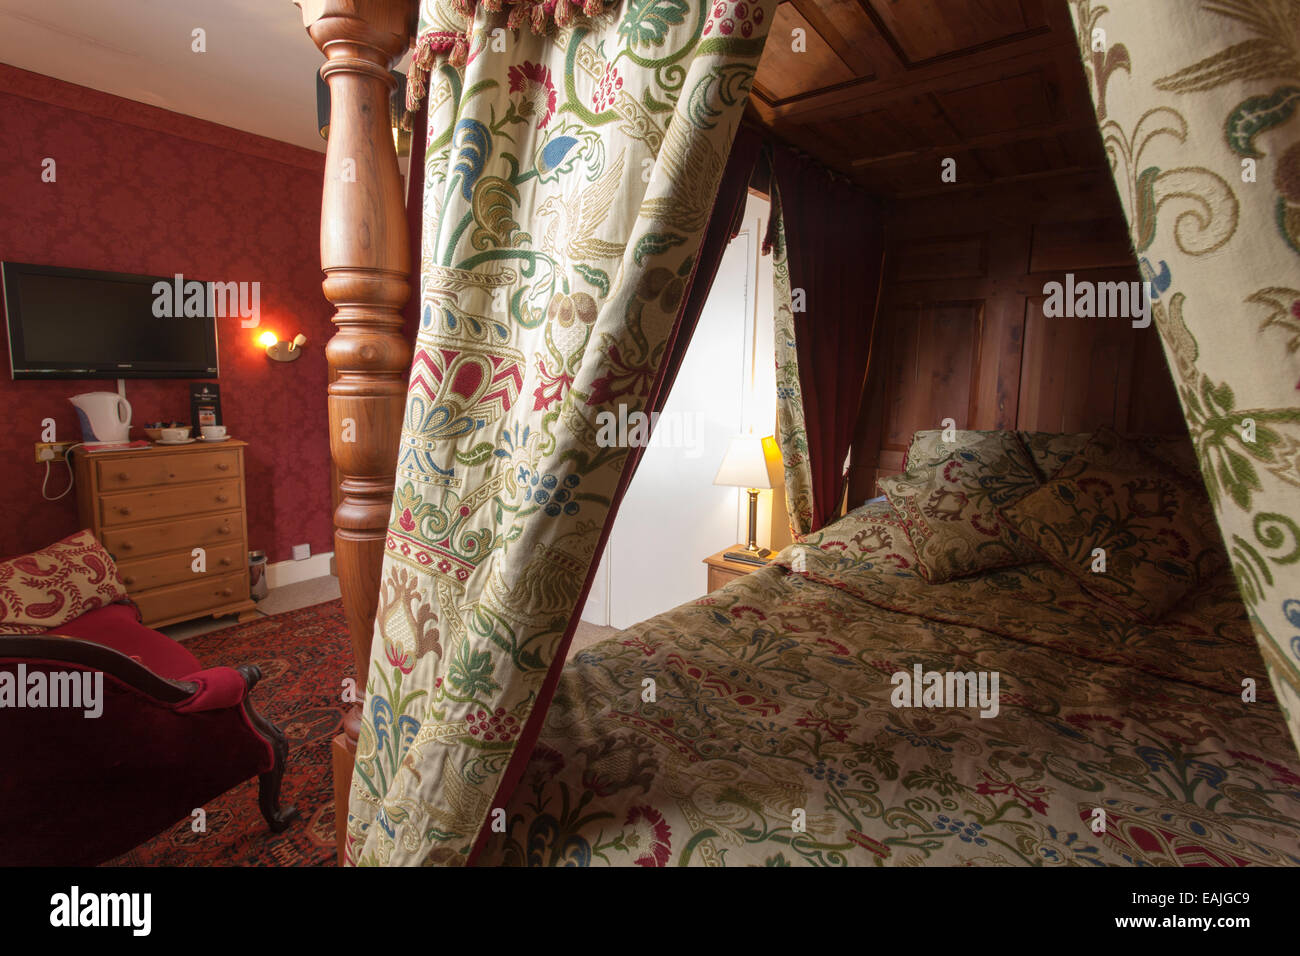 Four poster bed in a hotel bed and breakfast room Stock Photo